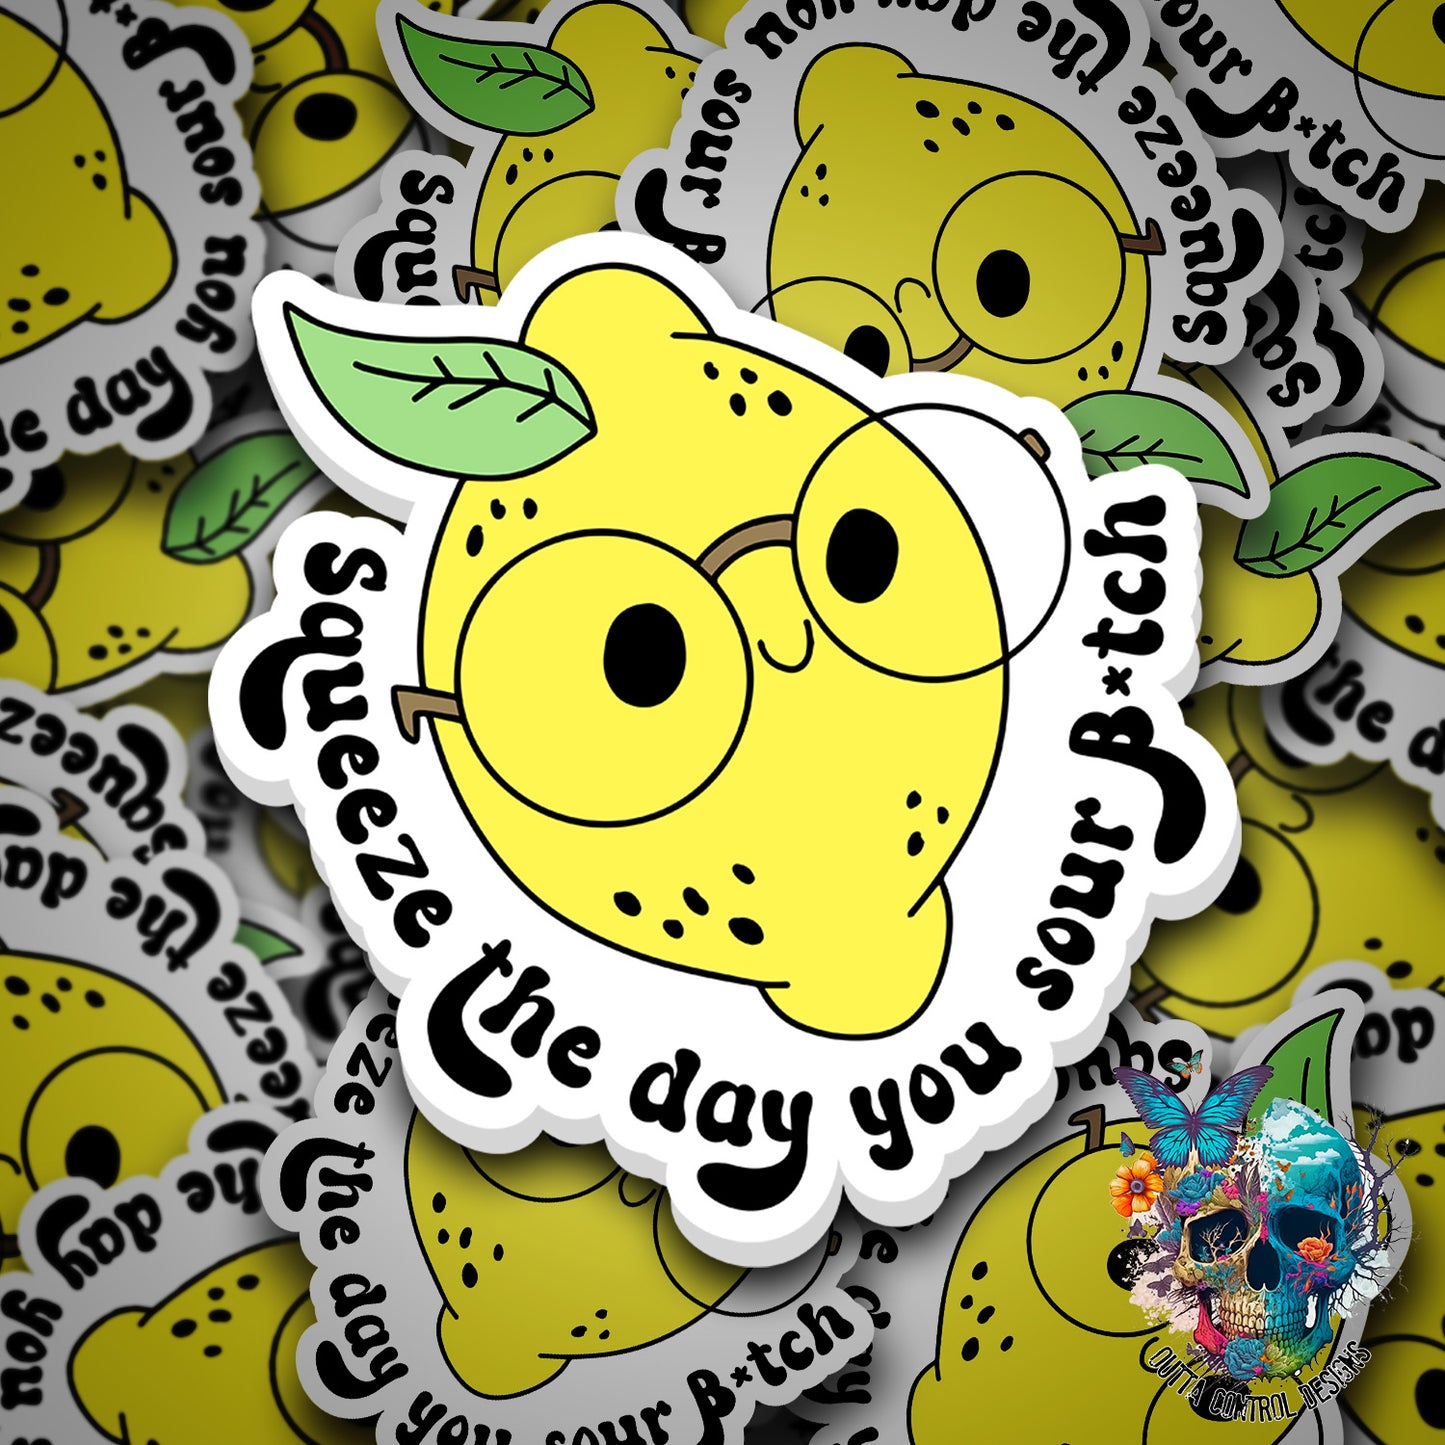 Squeeze the day you sour bitch sticker